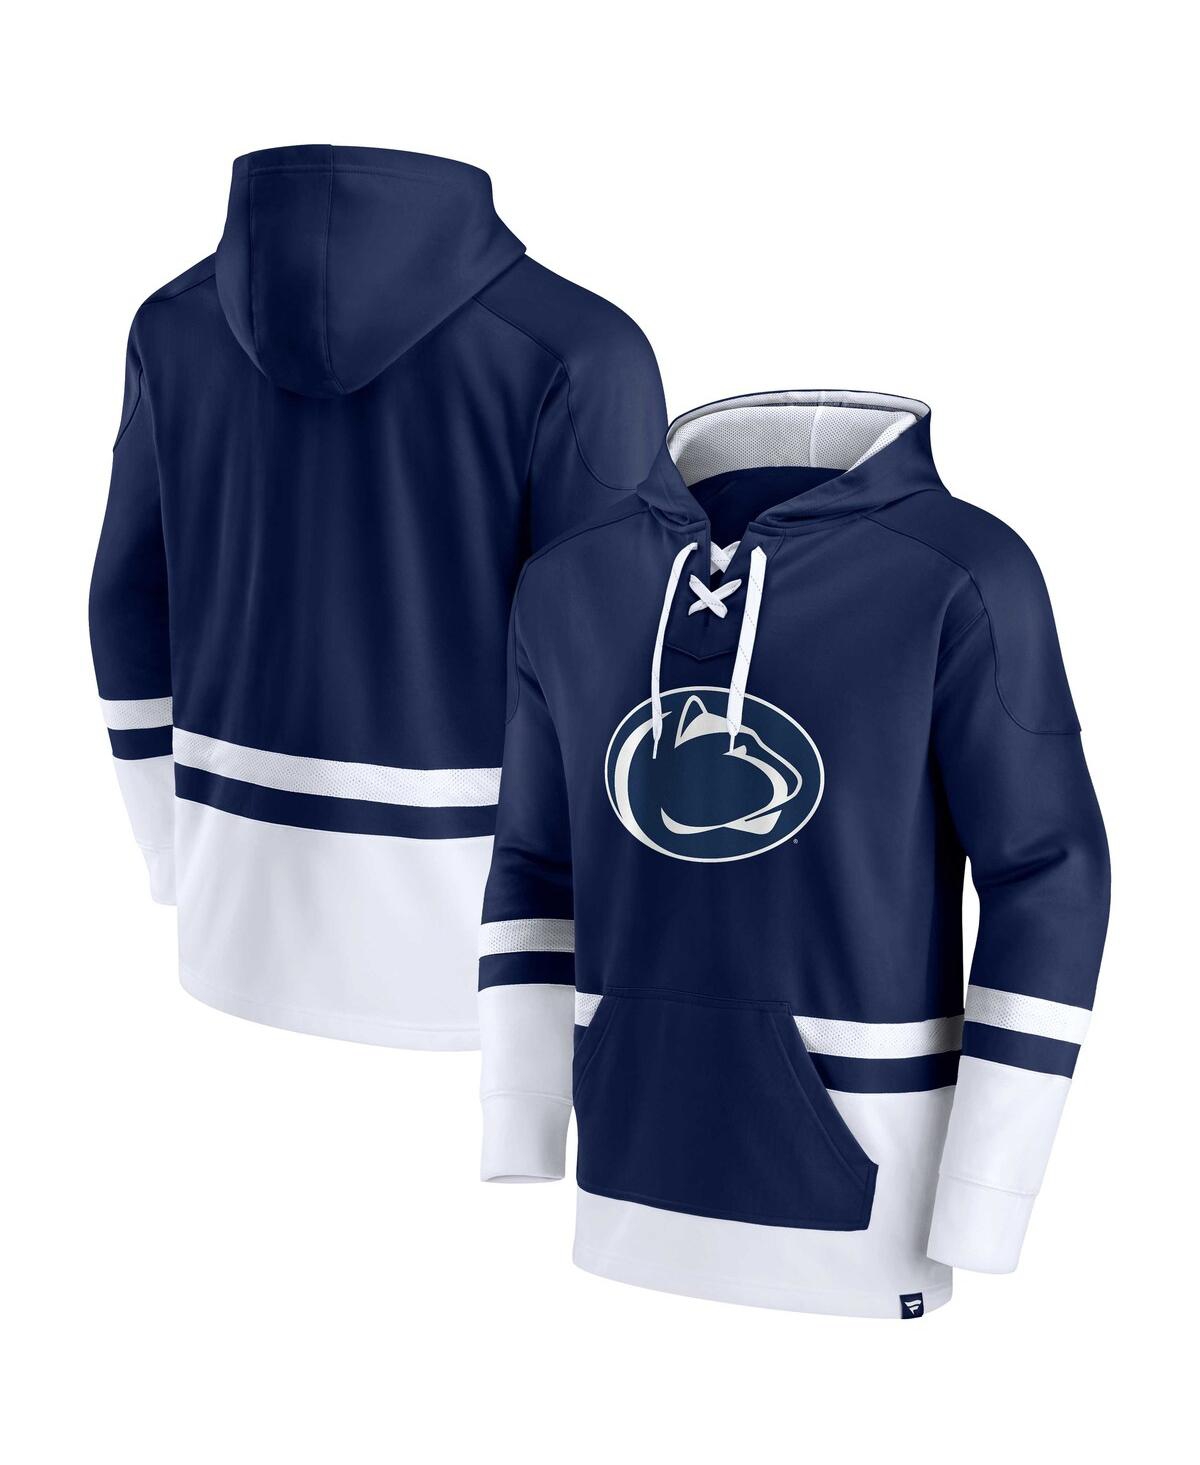 Fanatics Men's  Navy Penn State Nittany Lions First Battle Pullover Hoodie